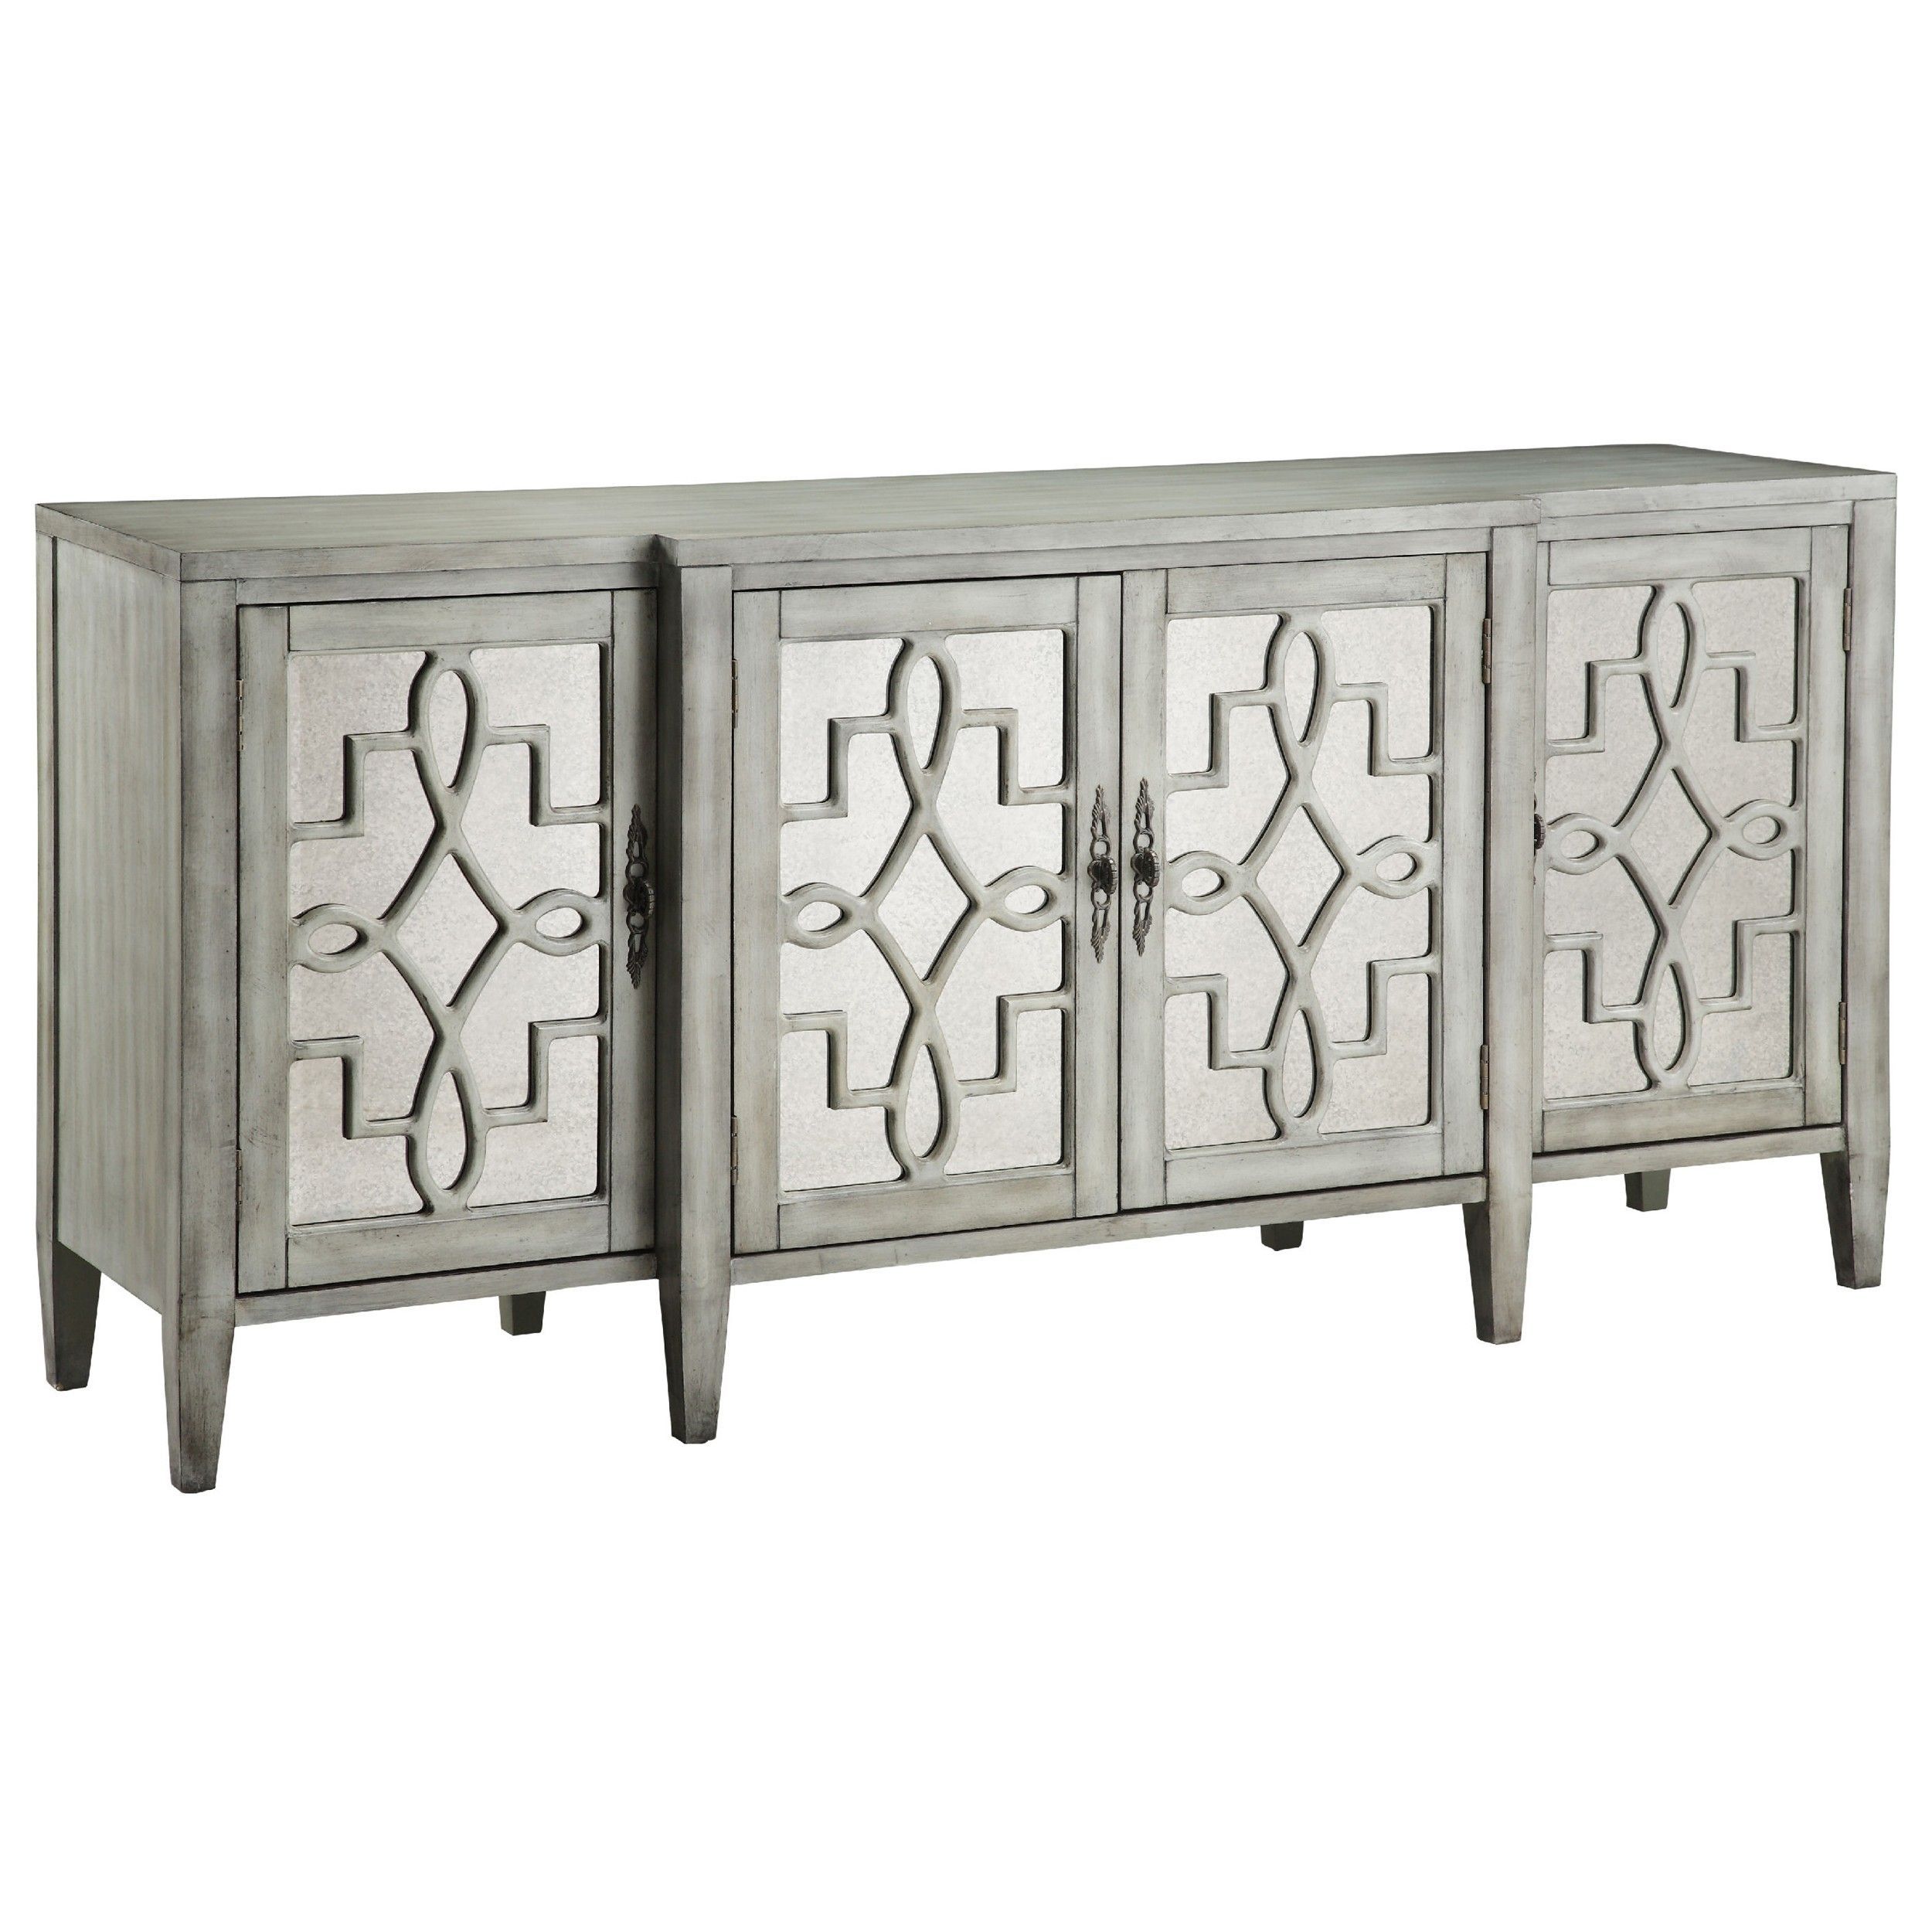 Isabelle Credenza | Furnishings | Pinterest | Credenza, Sideboard In Aged Mirrored 4 Door Sideboards (Photo 5 of 30)